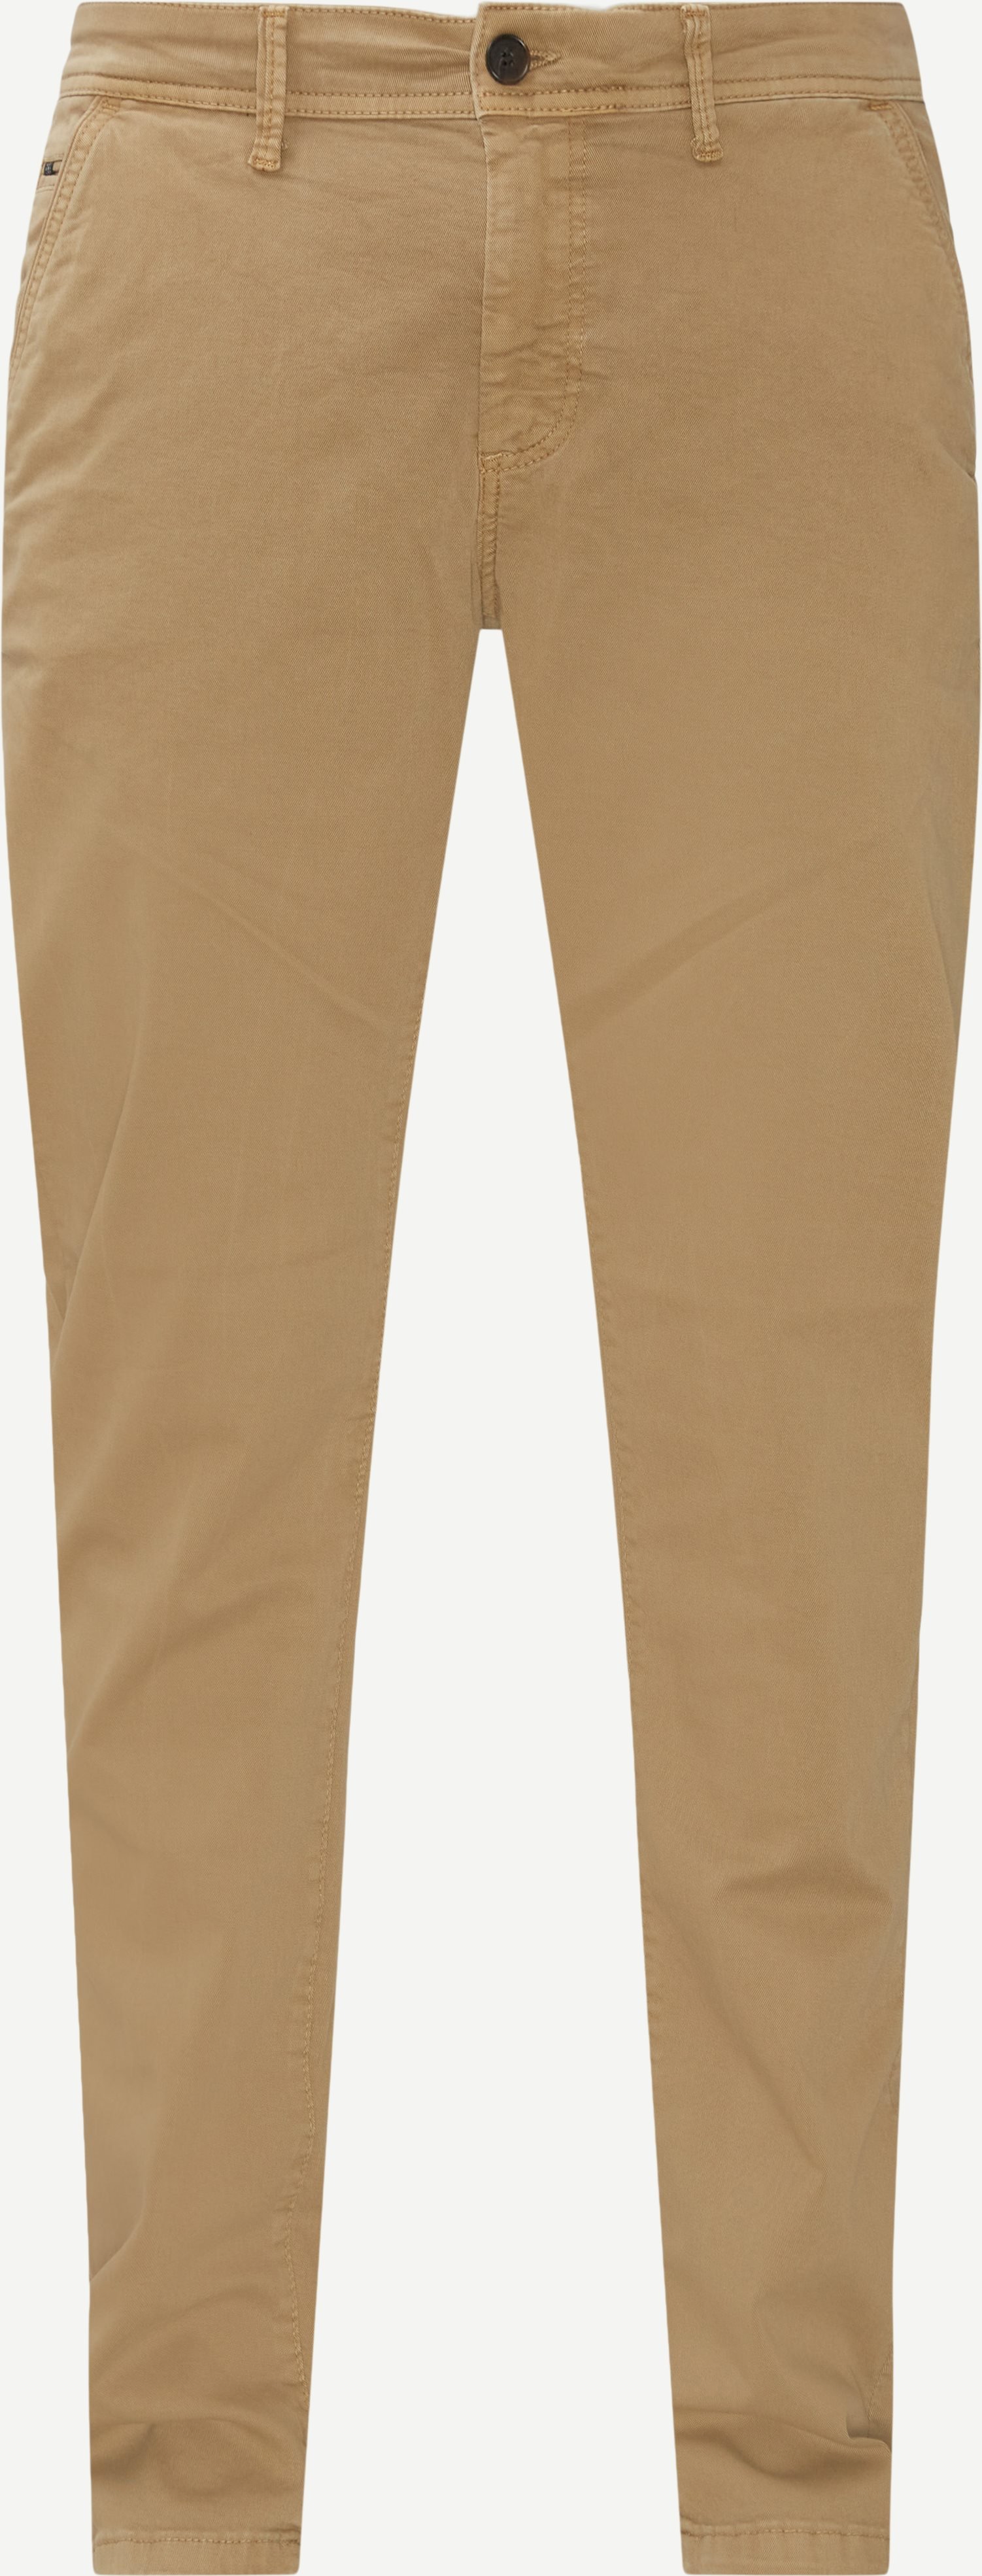 Victor Chino - Bukser - Tapered fit - Sand